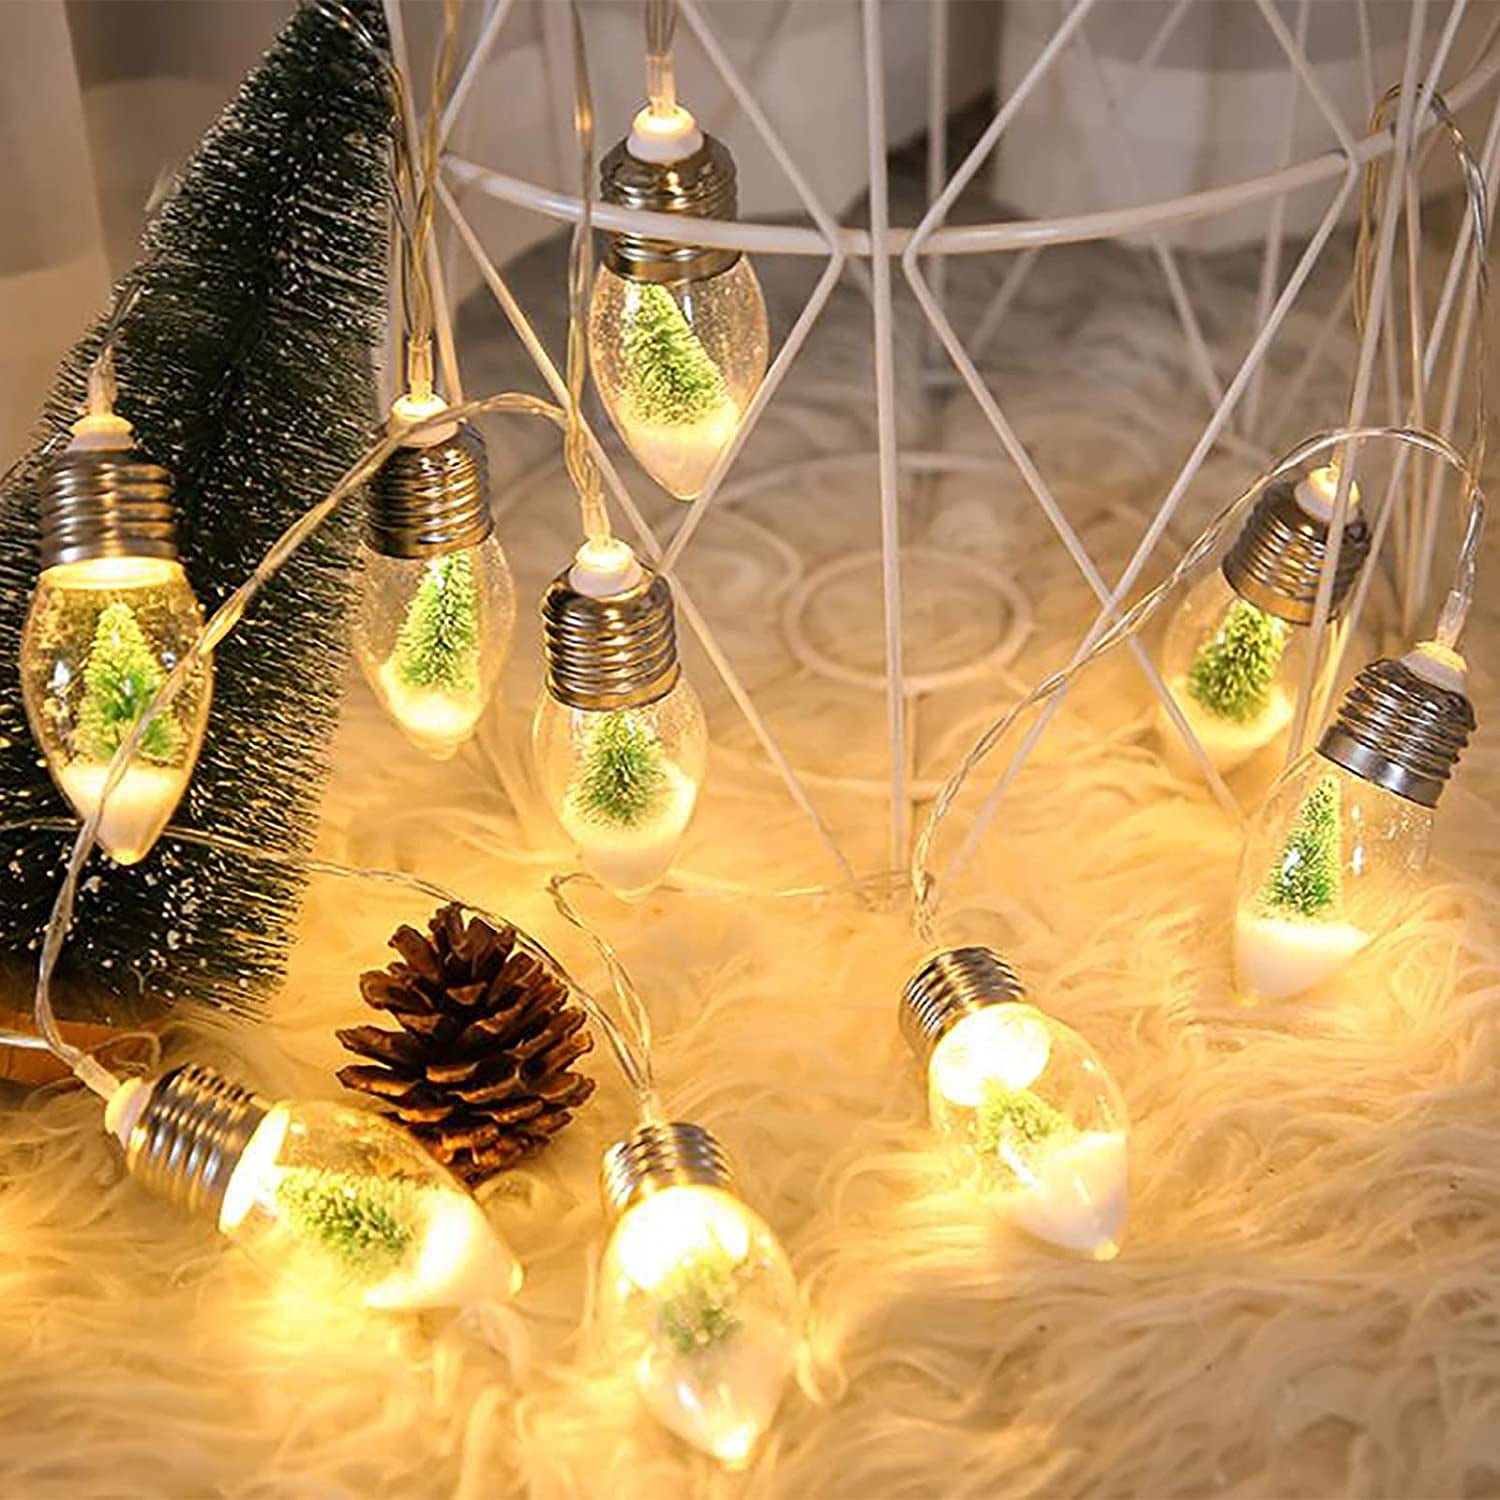 Wire Branch lights led fairy string lights Small Cafe Christmas Plug-In Decor 